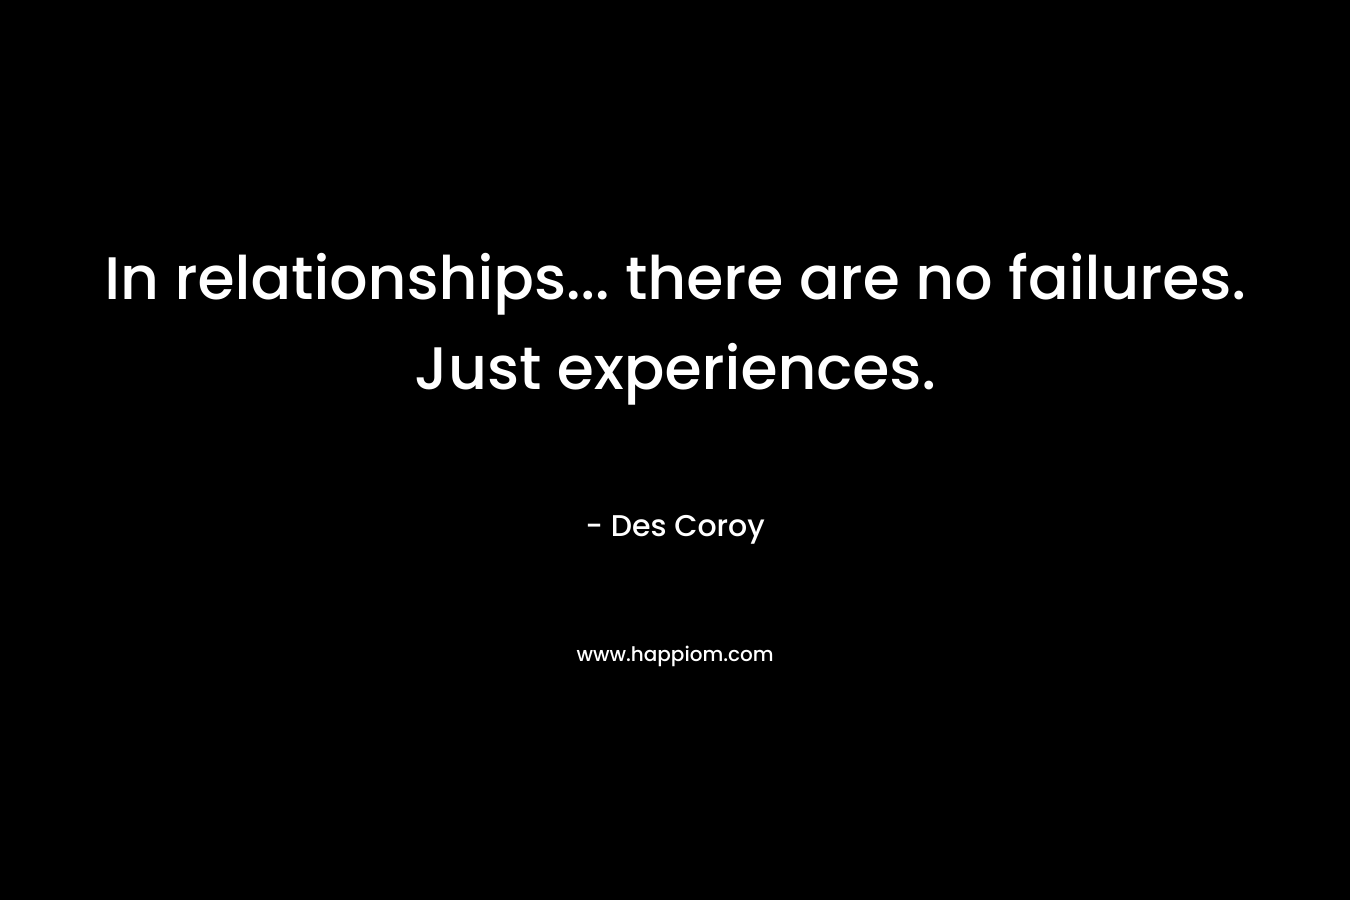 In relationships... there are no failures. Just experiences.